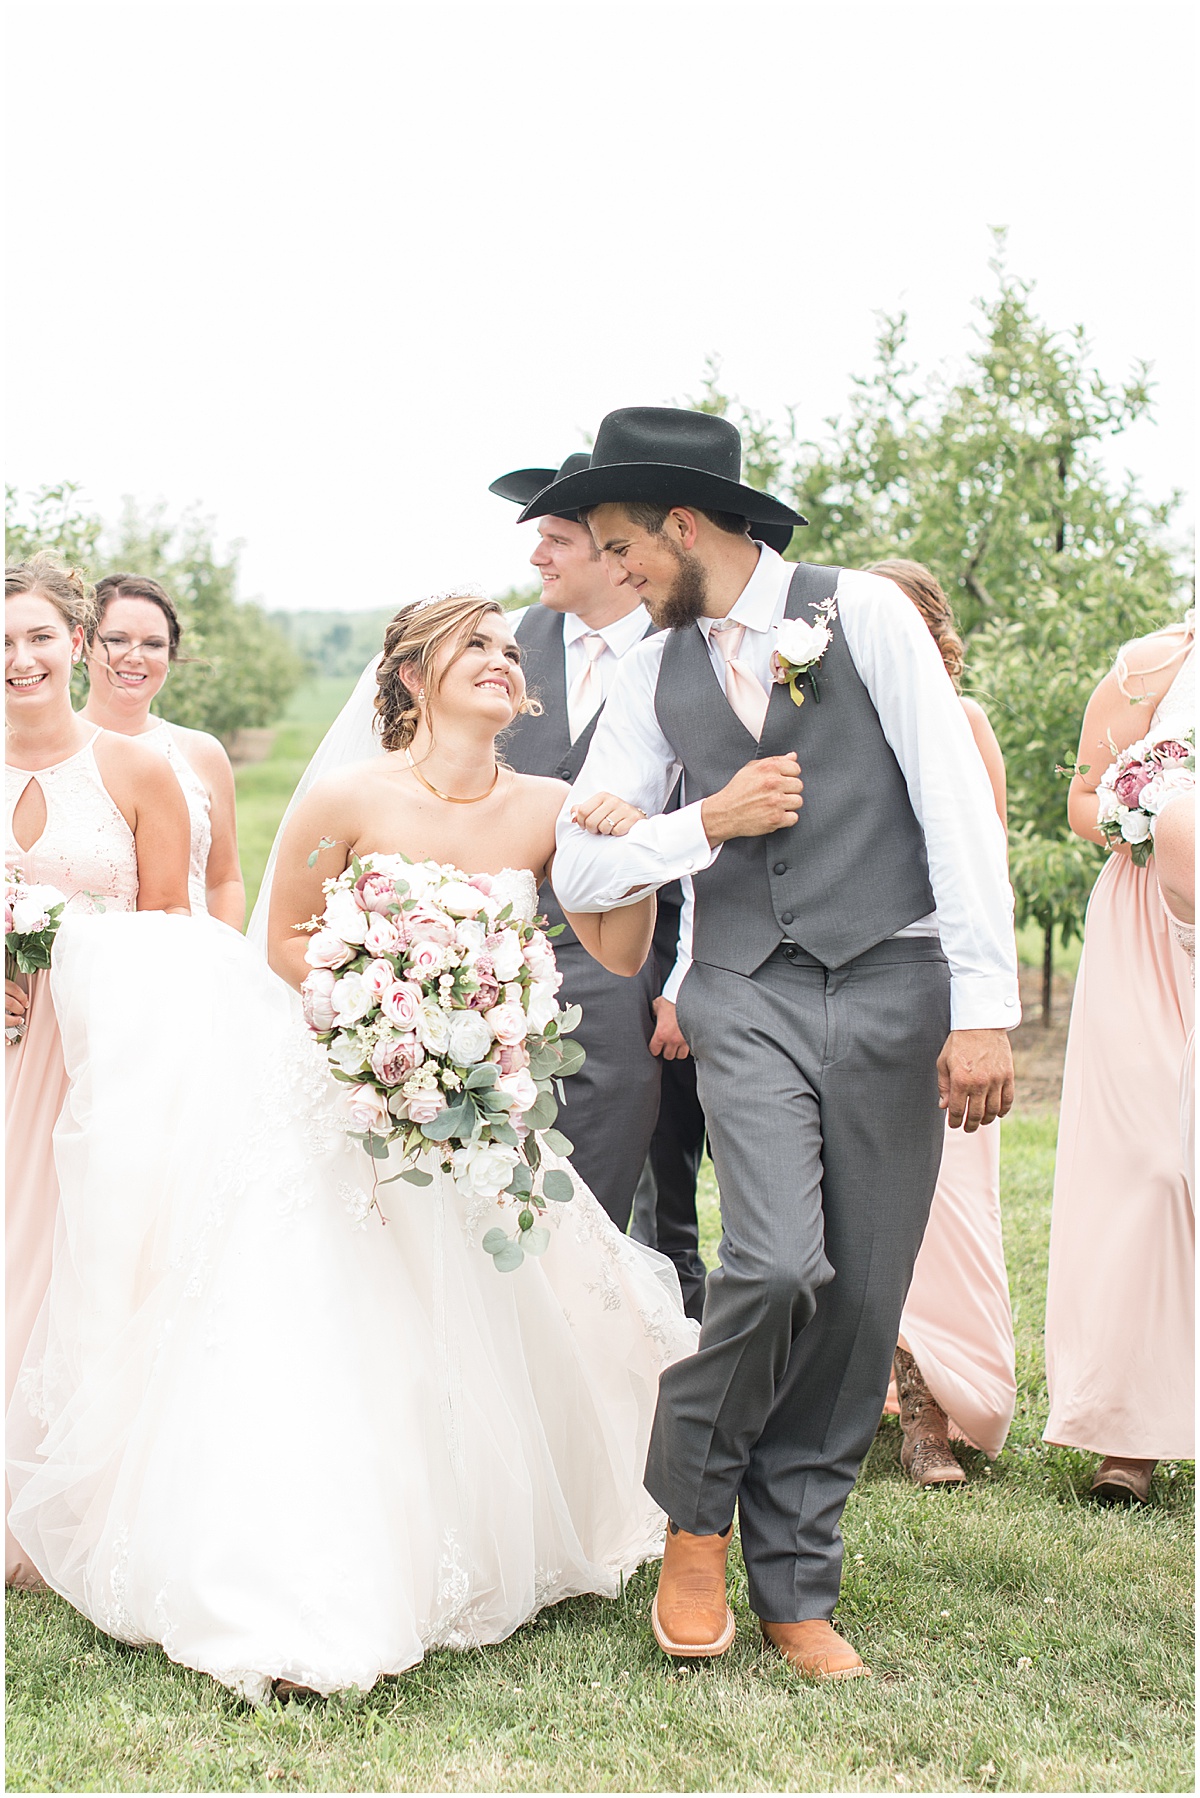 Bridal party photos at Wea Creek Orchard in Lafayette, Indiana